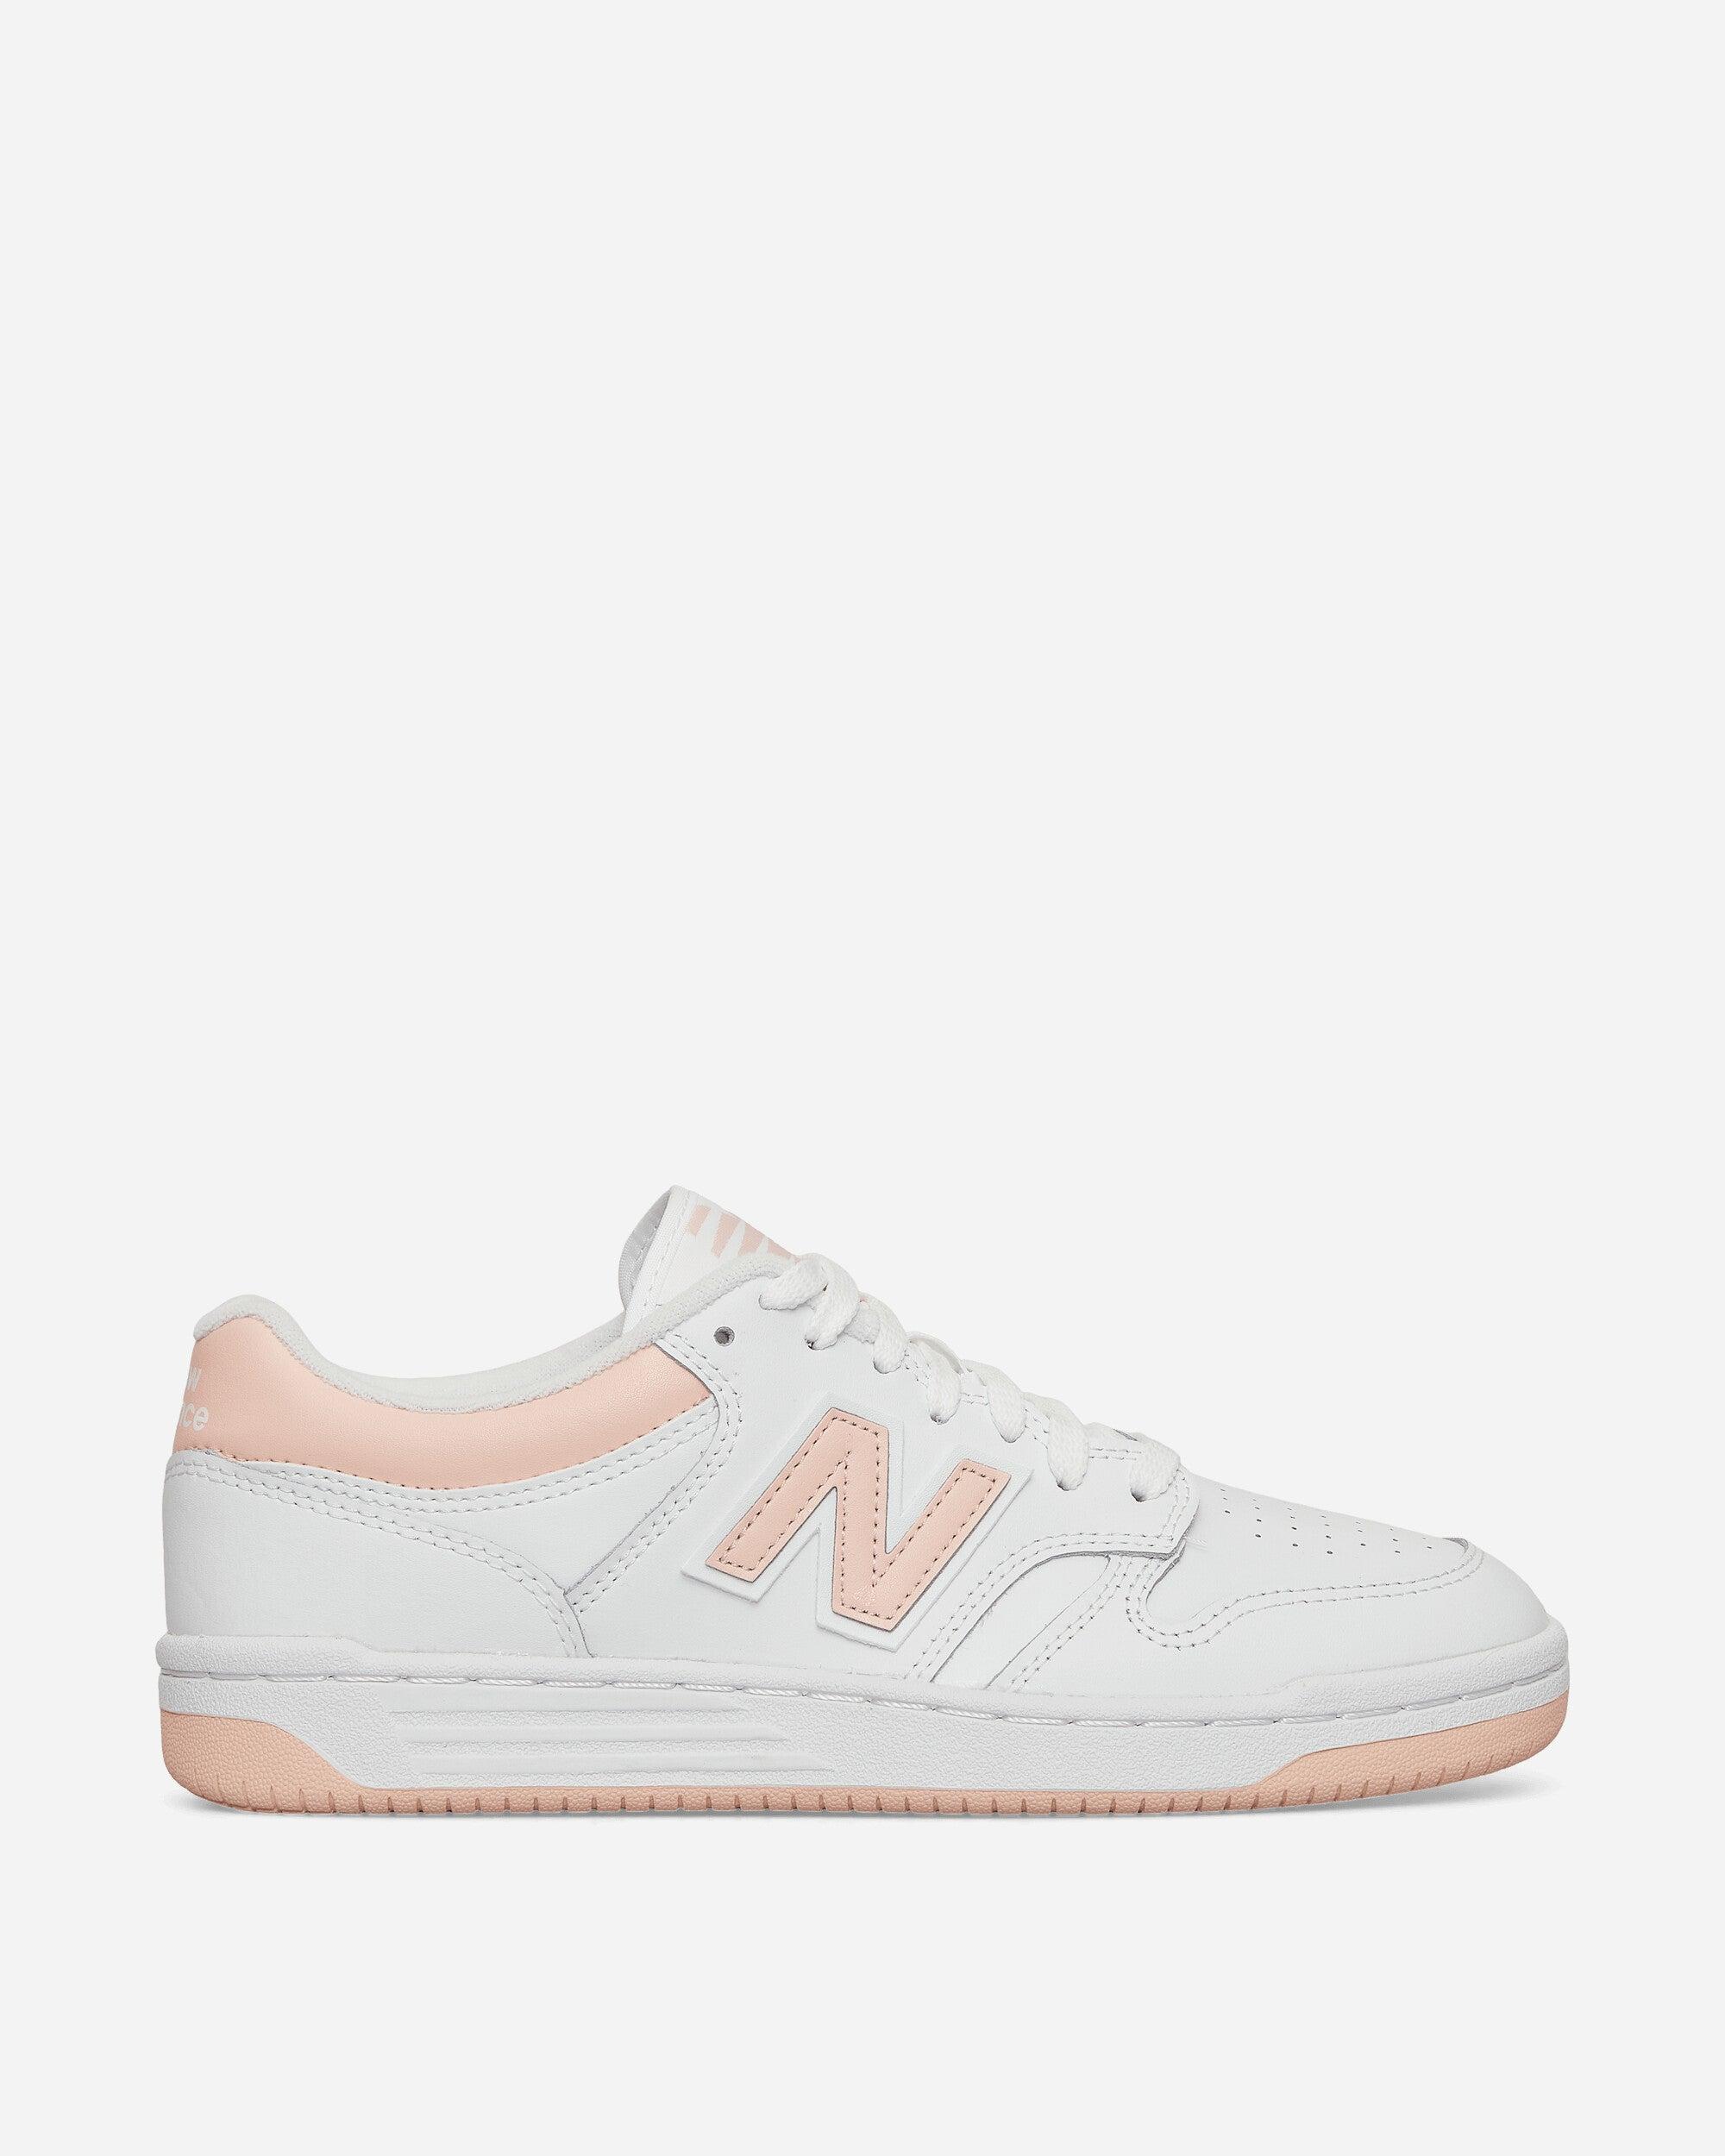 New Balance 480 Sneakers White / Pink for Men | Lyst